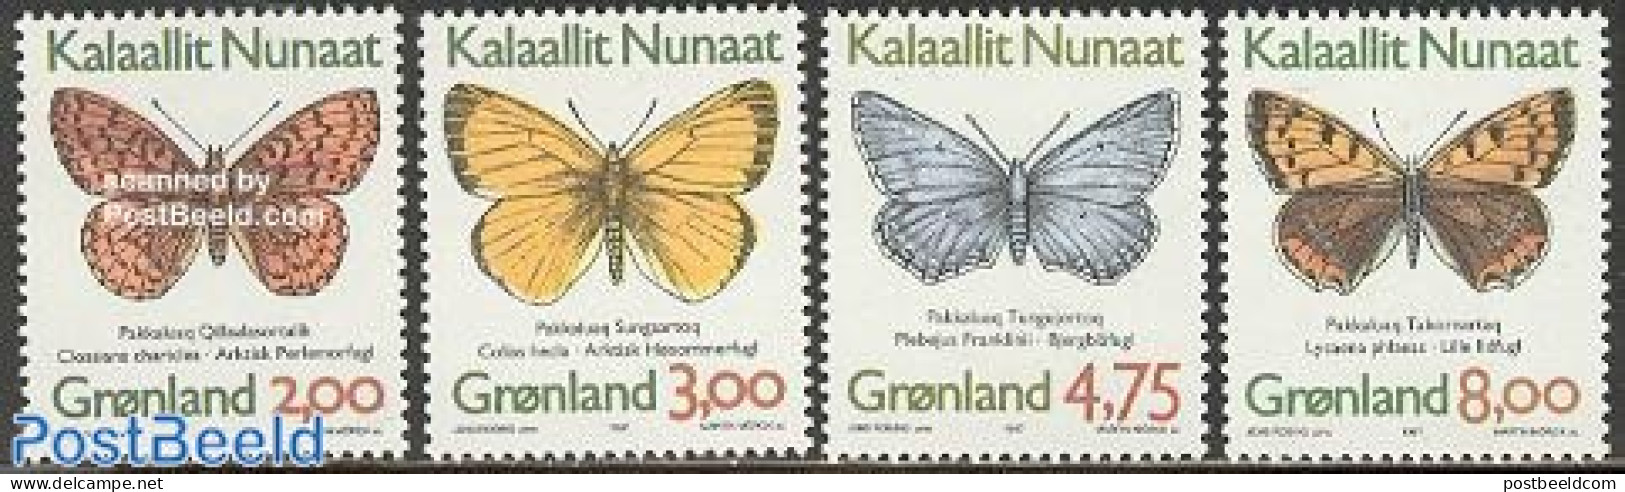 Greenland 1997 Butterflies 4v Phosphor (from Sheet), Mint NH, Nature - Butterflies - Unused Stamps